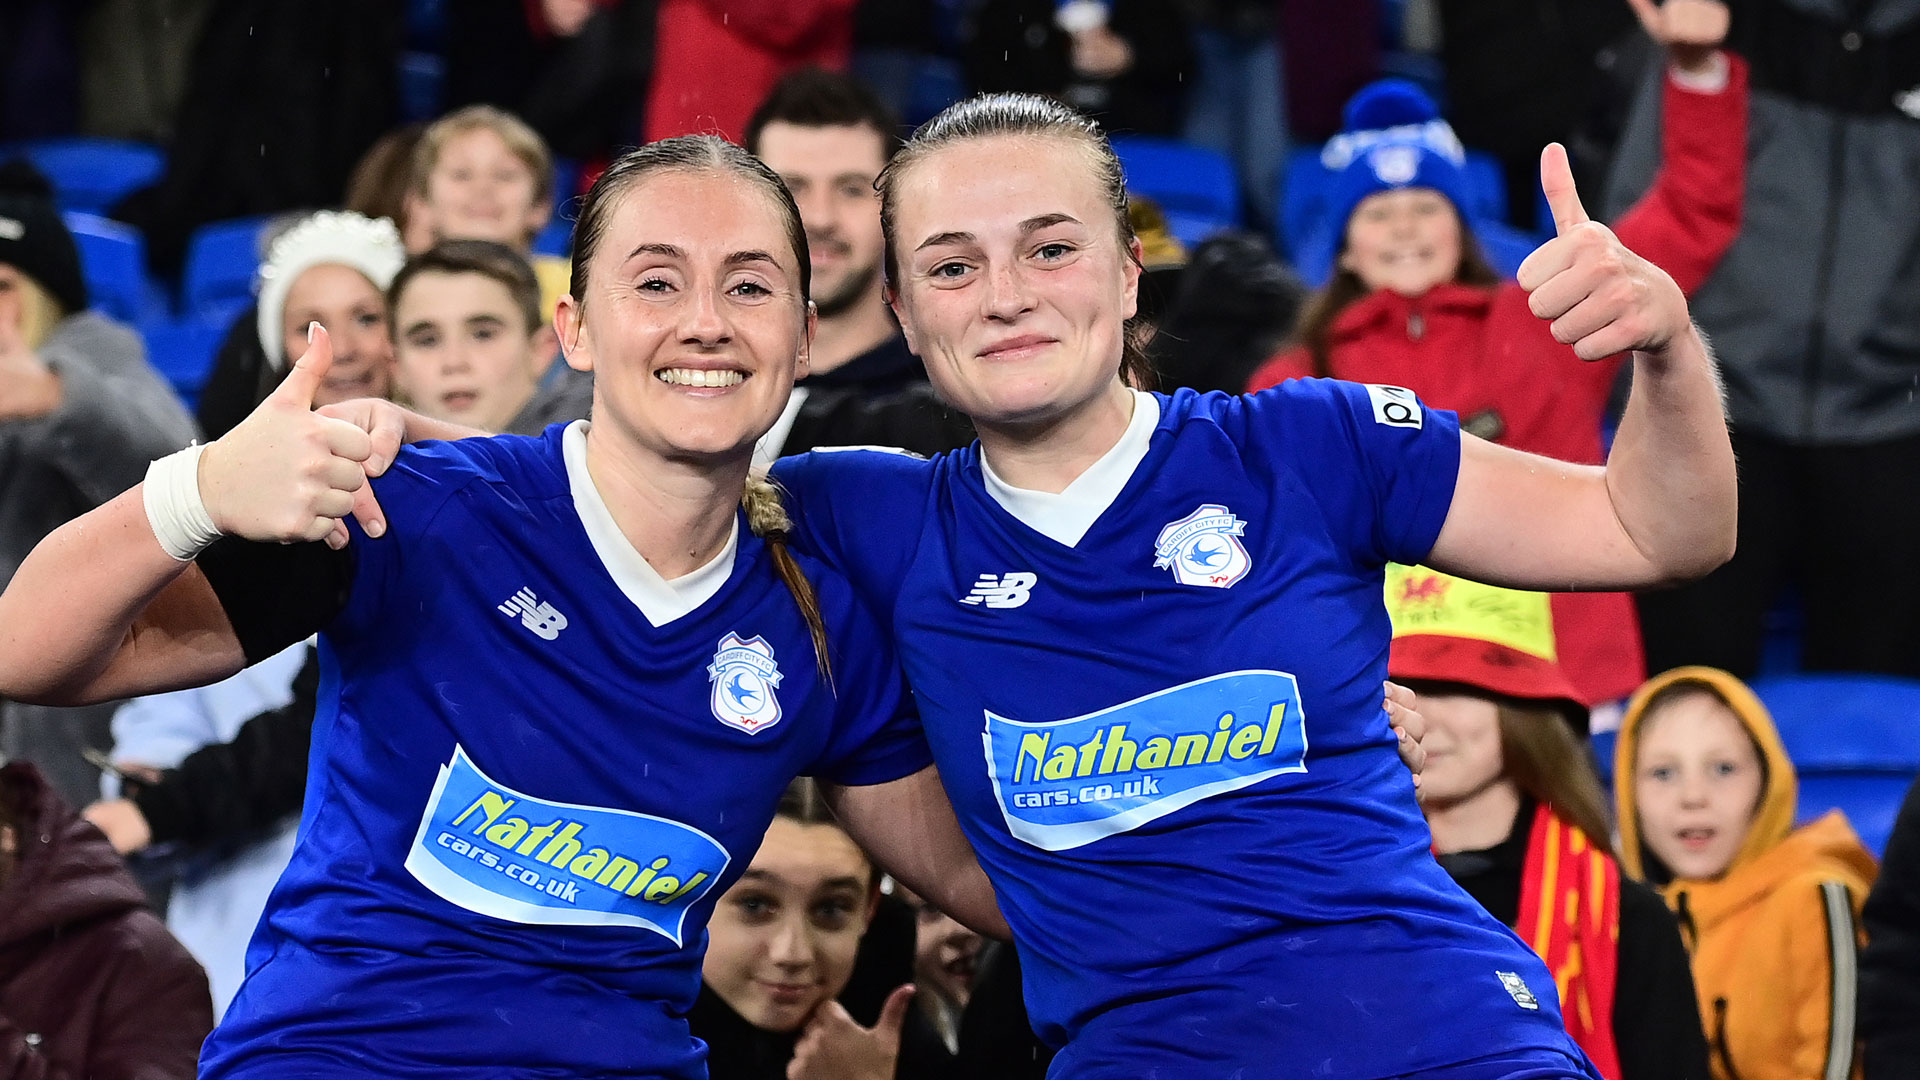 Hannah Power and Ffion Price celebrate at CCS...